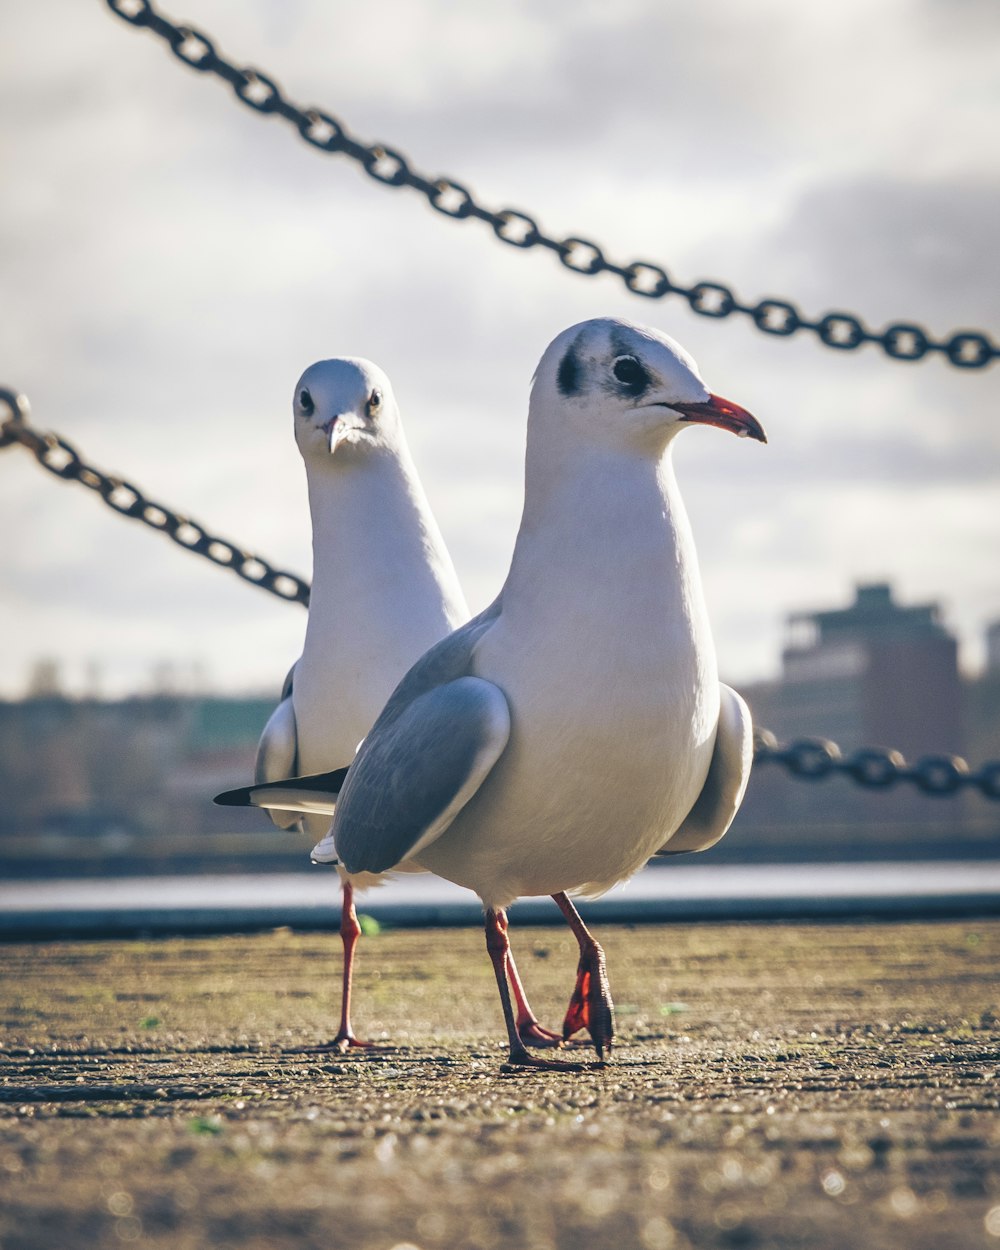 two seagulls standing on the ground next to a chain